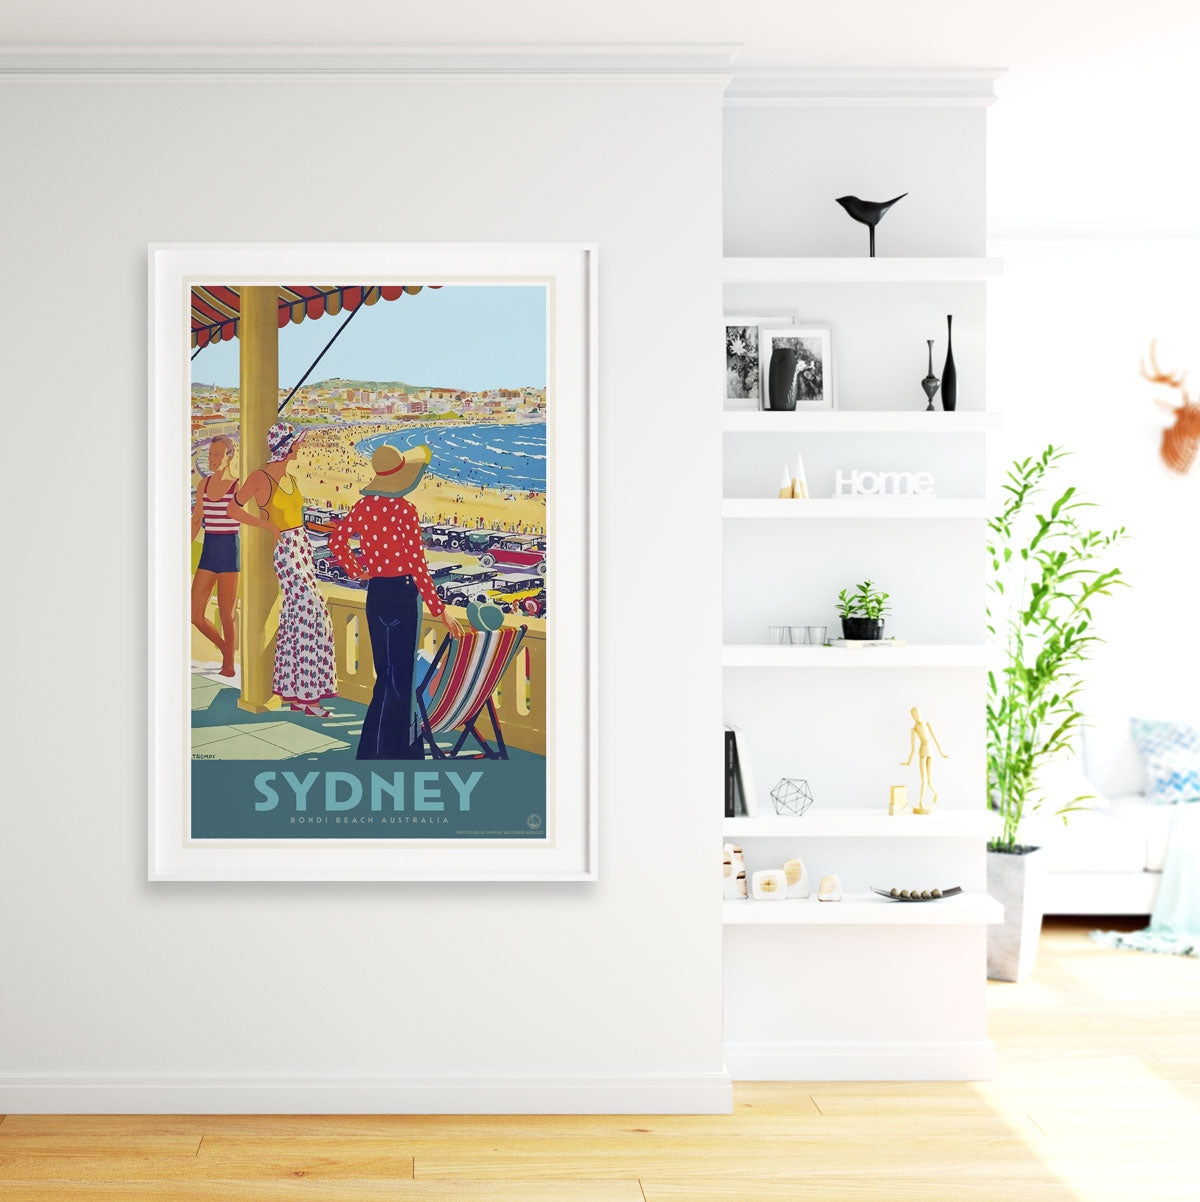 Sydney Australia vintage advertising poster print in various sizes from PLaces We Luv